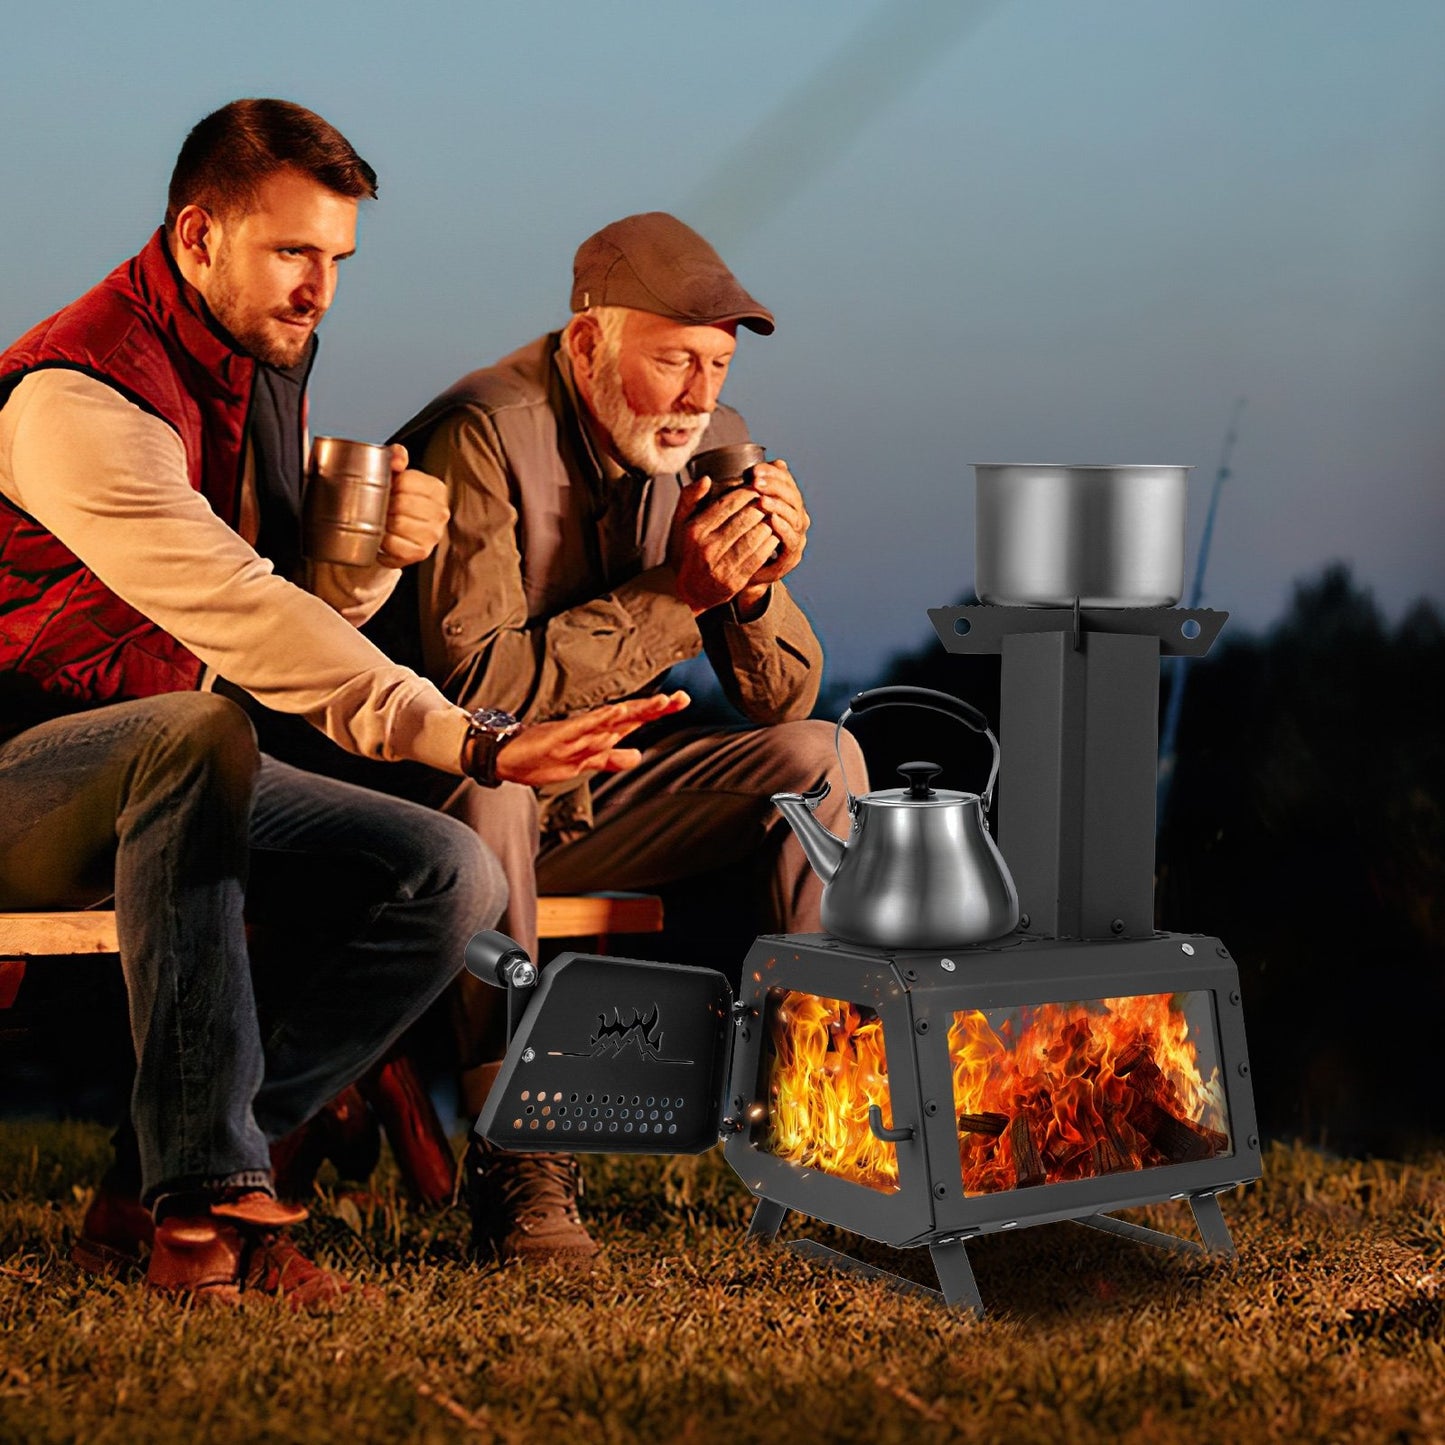 Portable Wood Camping Burning Stove Heater with 2 Cooking Positions, Black at Gallery Canada